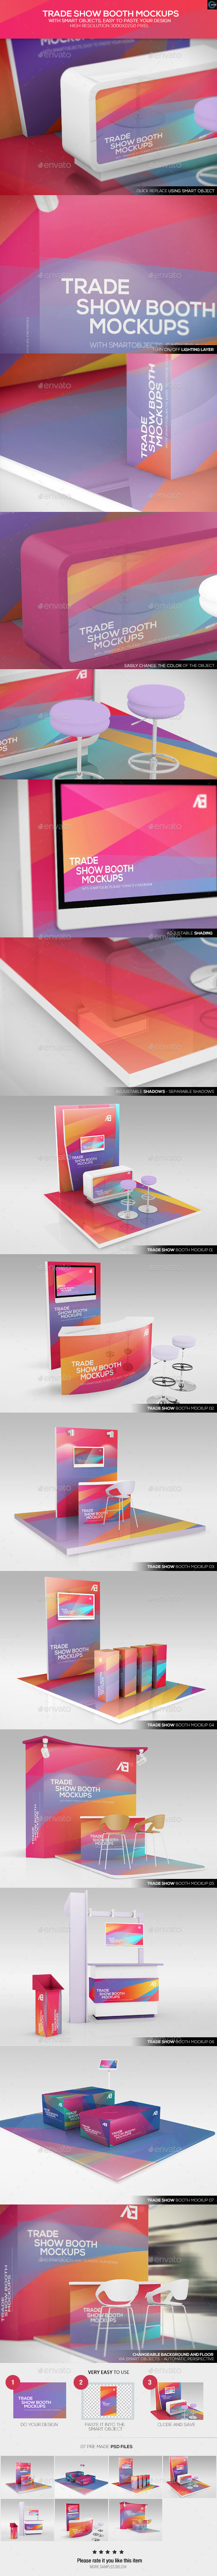 Trade 20show 20booth 20mockups 20preview